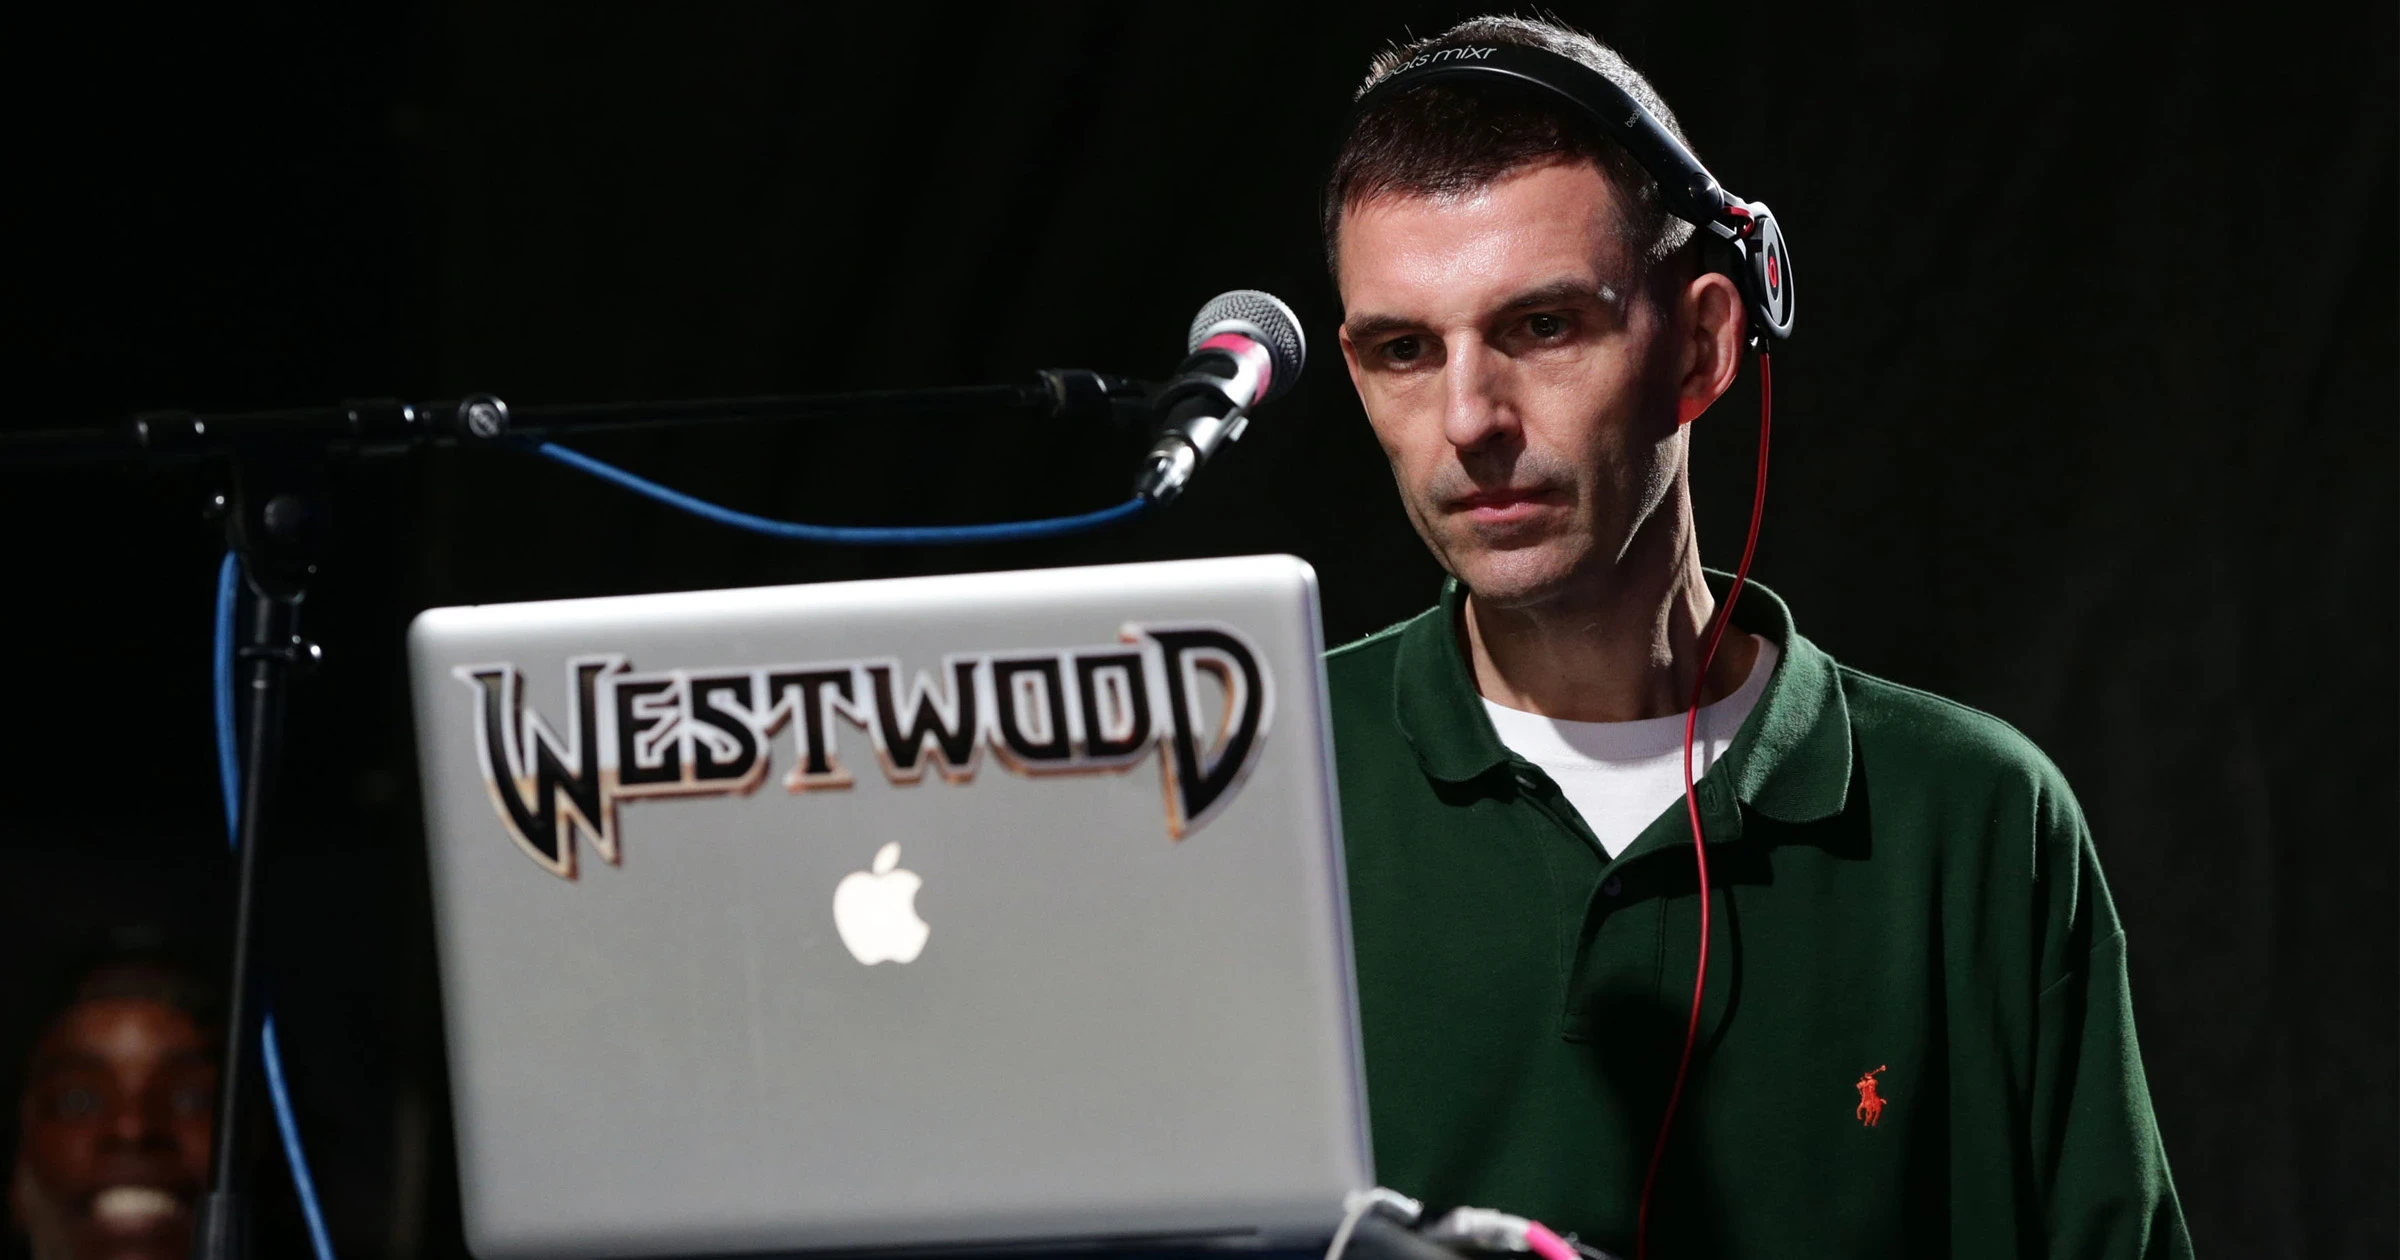  Disgraced DJ, Tim Westwood to perform his first gig in months in Lagos despite facing allegations of abusing ten women including a 14-year-old�girl